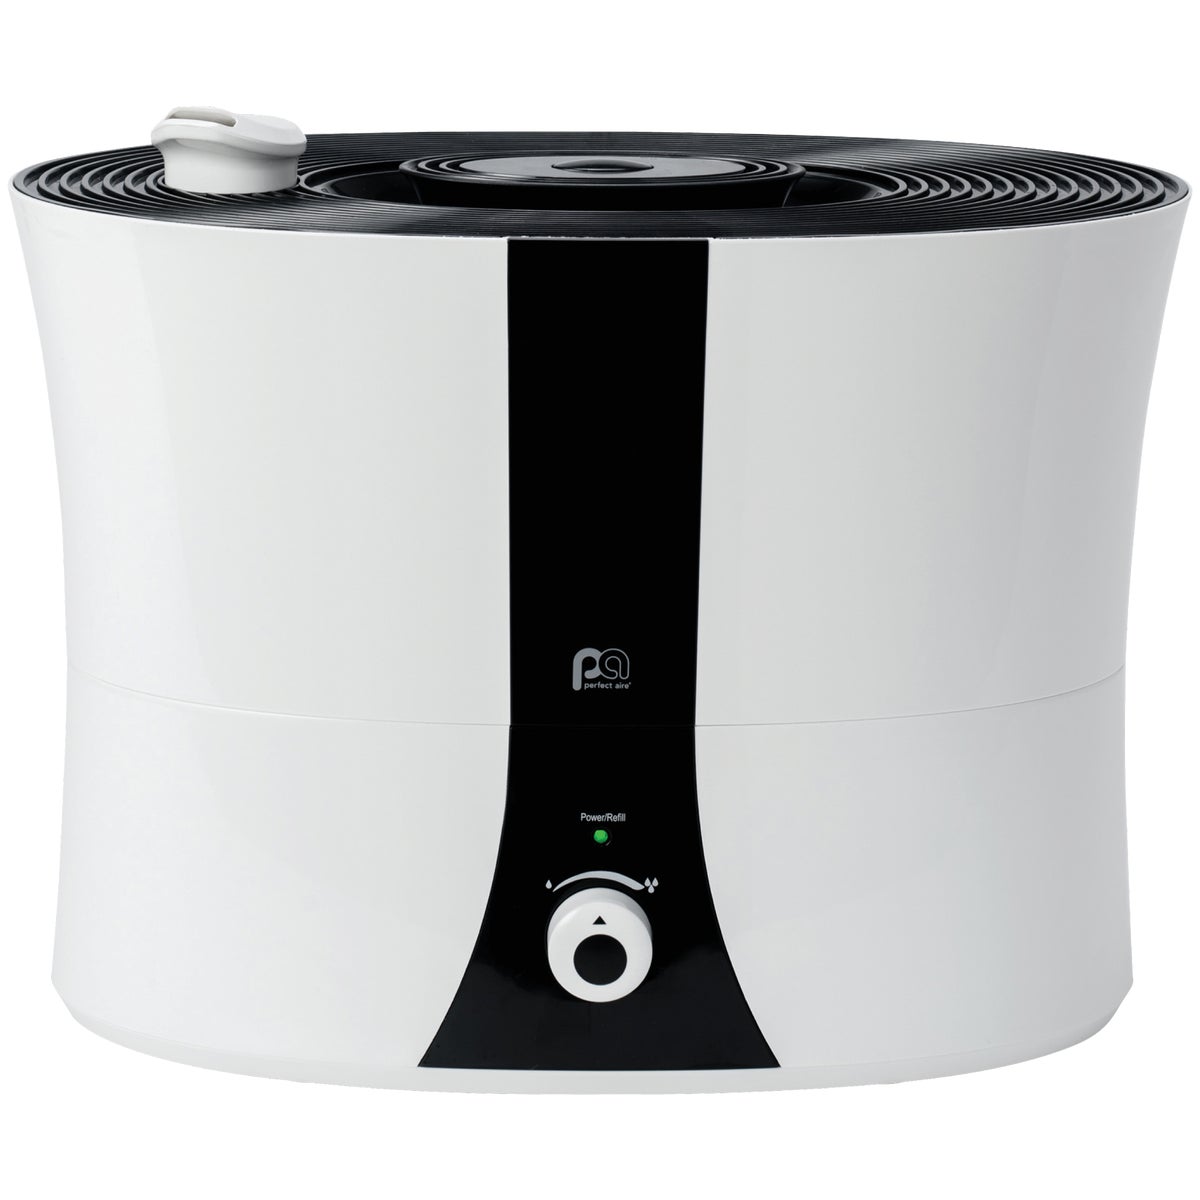 Perfect Aire 1.4 Gal. Capacity 193 Sq. Ft. Medium Size Room Ultrasonic Cool Mist Humidifier